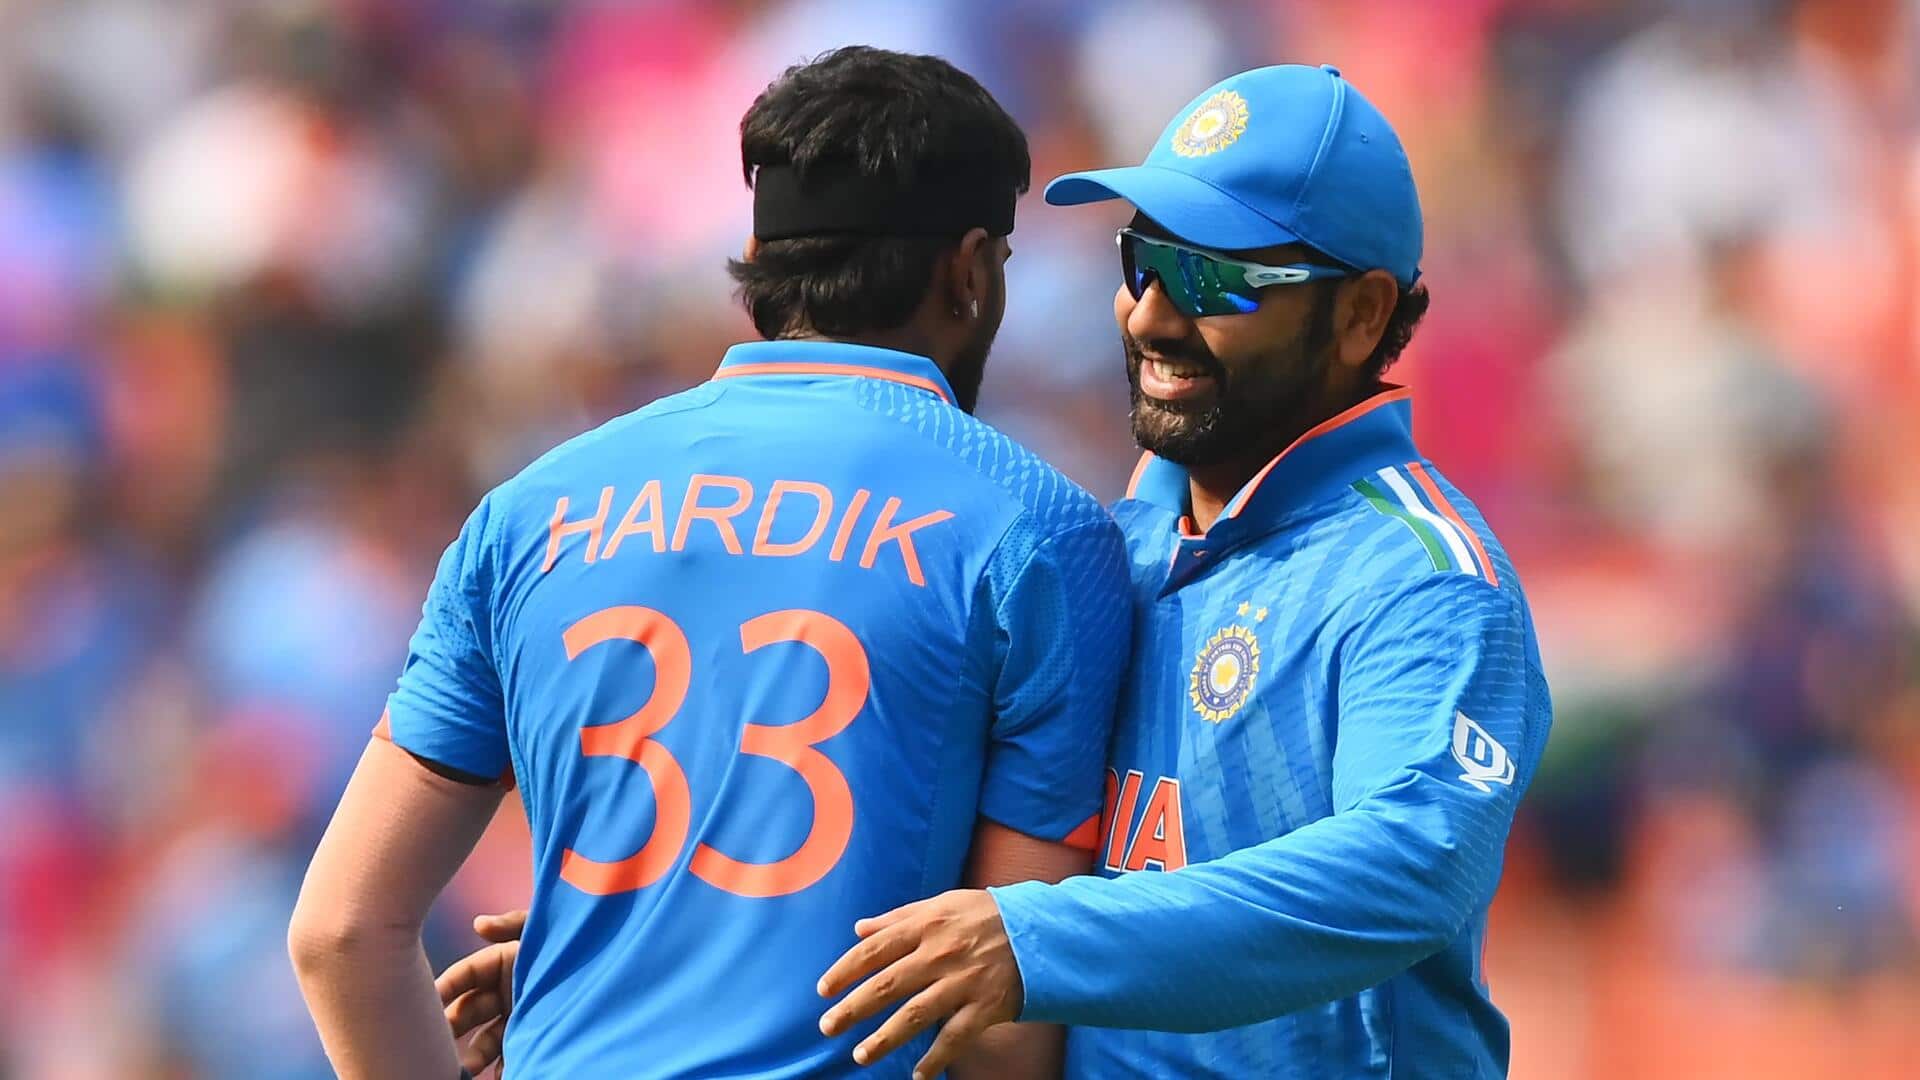 India go 8-0 against Pakistan in ODI World Cups: Stats